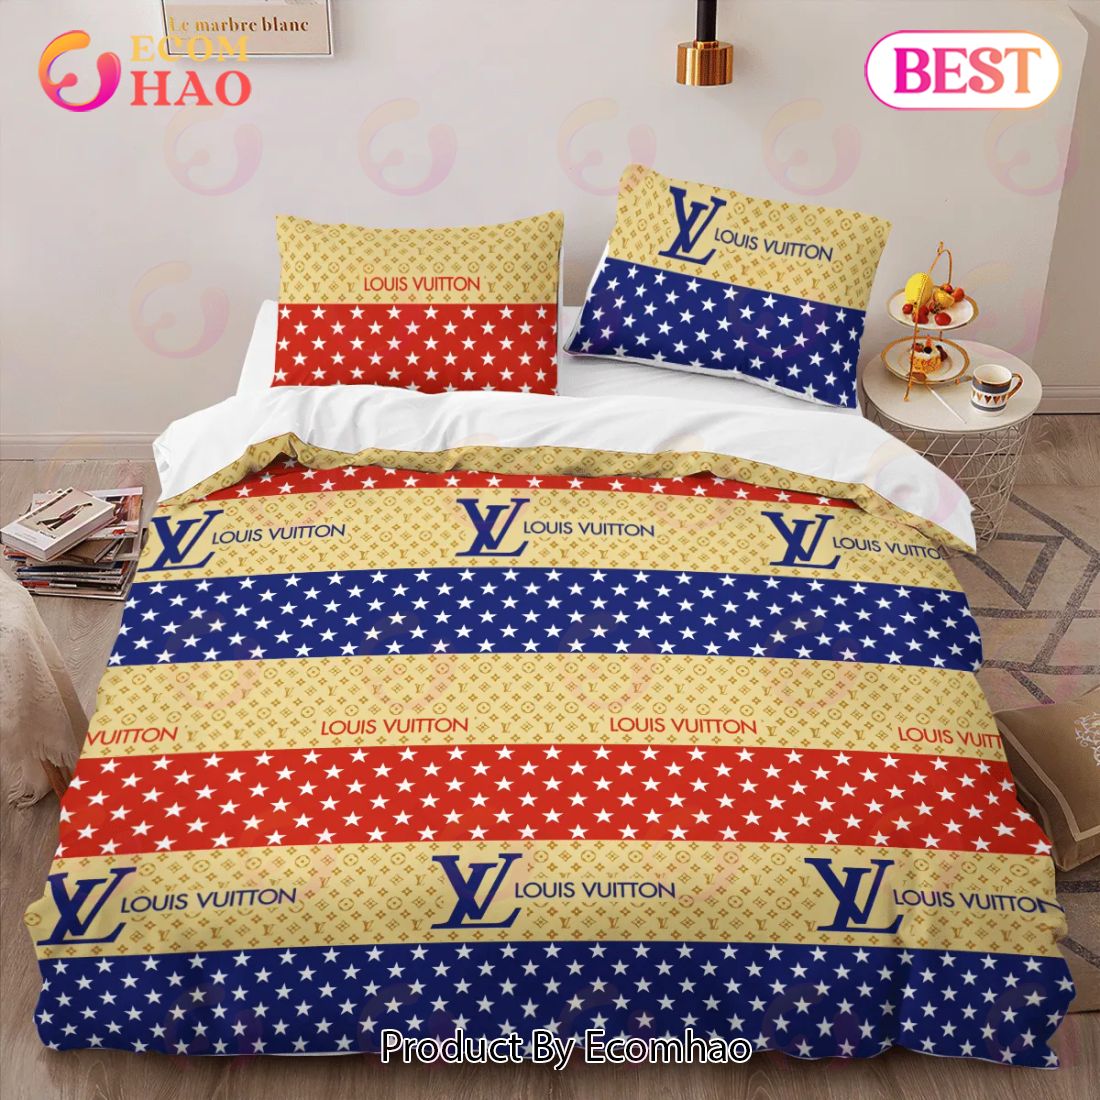 Louis Vuitton Colorful Luxury Brand High-End Bedding Sets Lv